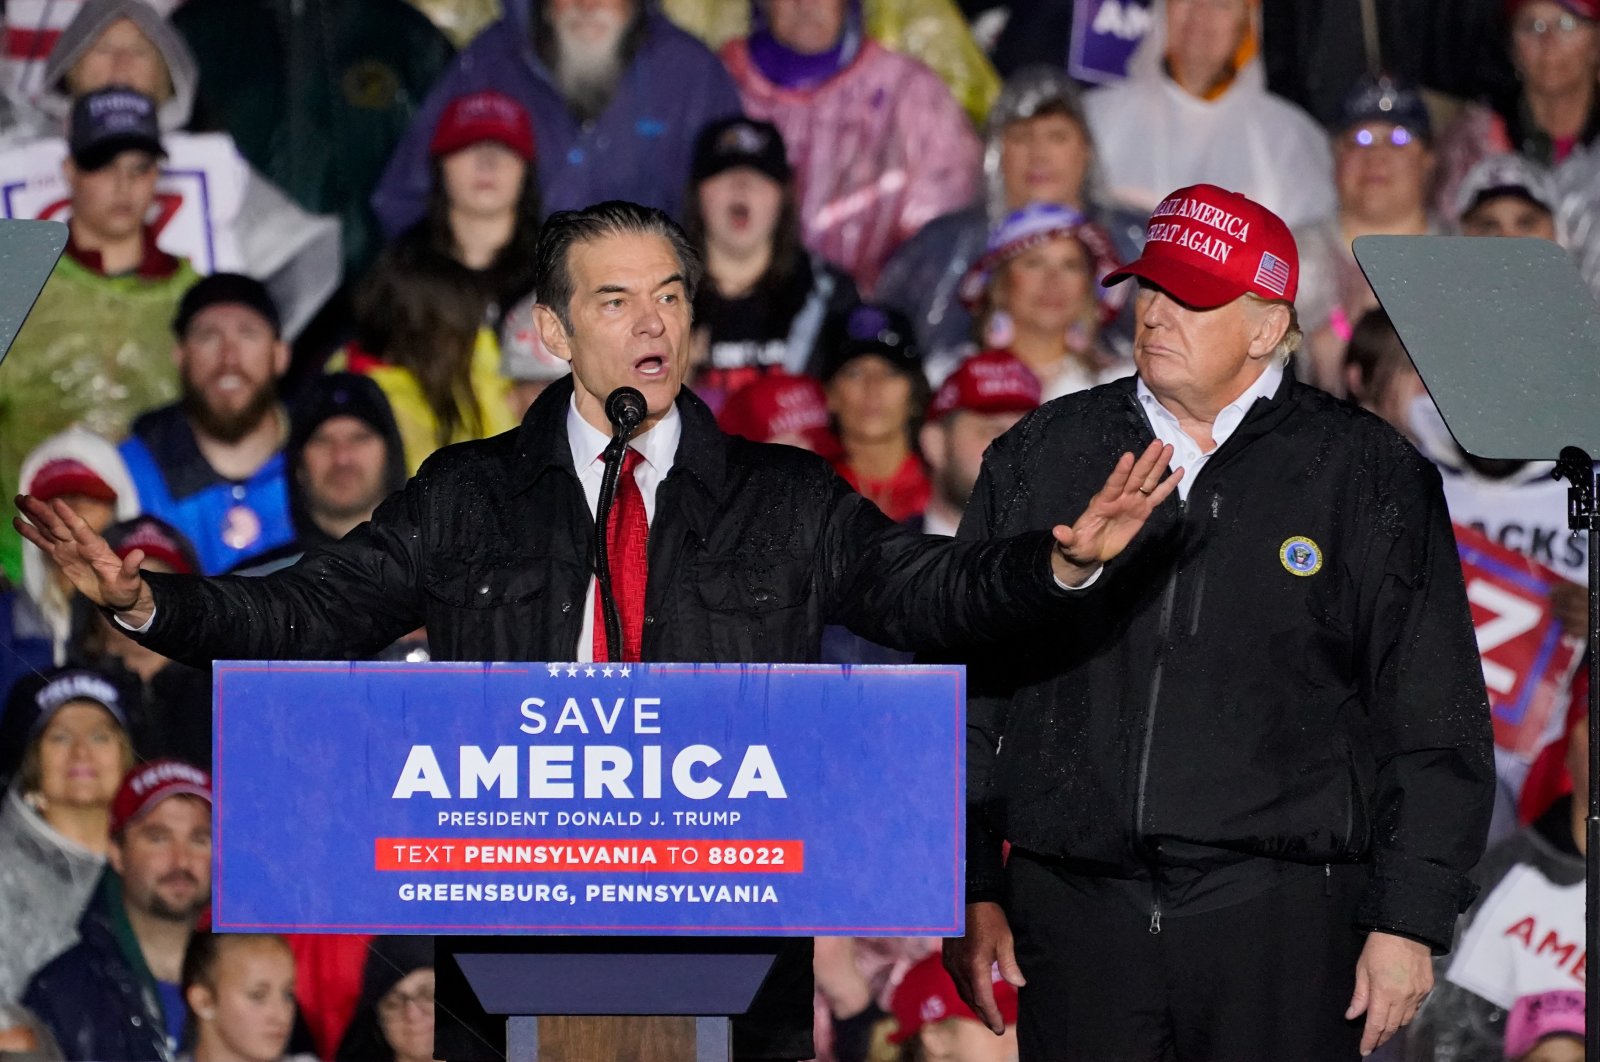 Pennsylvania Senate candidate Dr. Mehmet Oz (L) accompanied by former President Donald Trump, speaks at a campaign rally in Greensburg, Pa., U.S., May 6, 2022. (AP Photo)